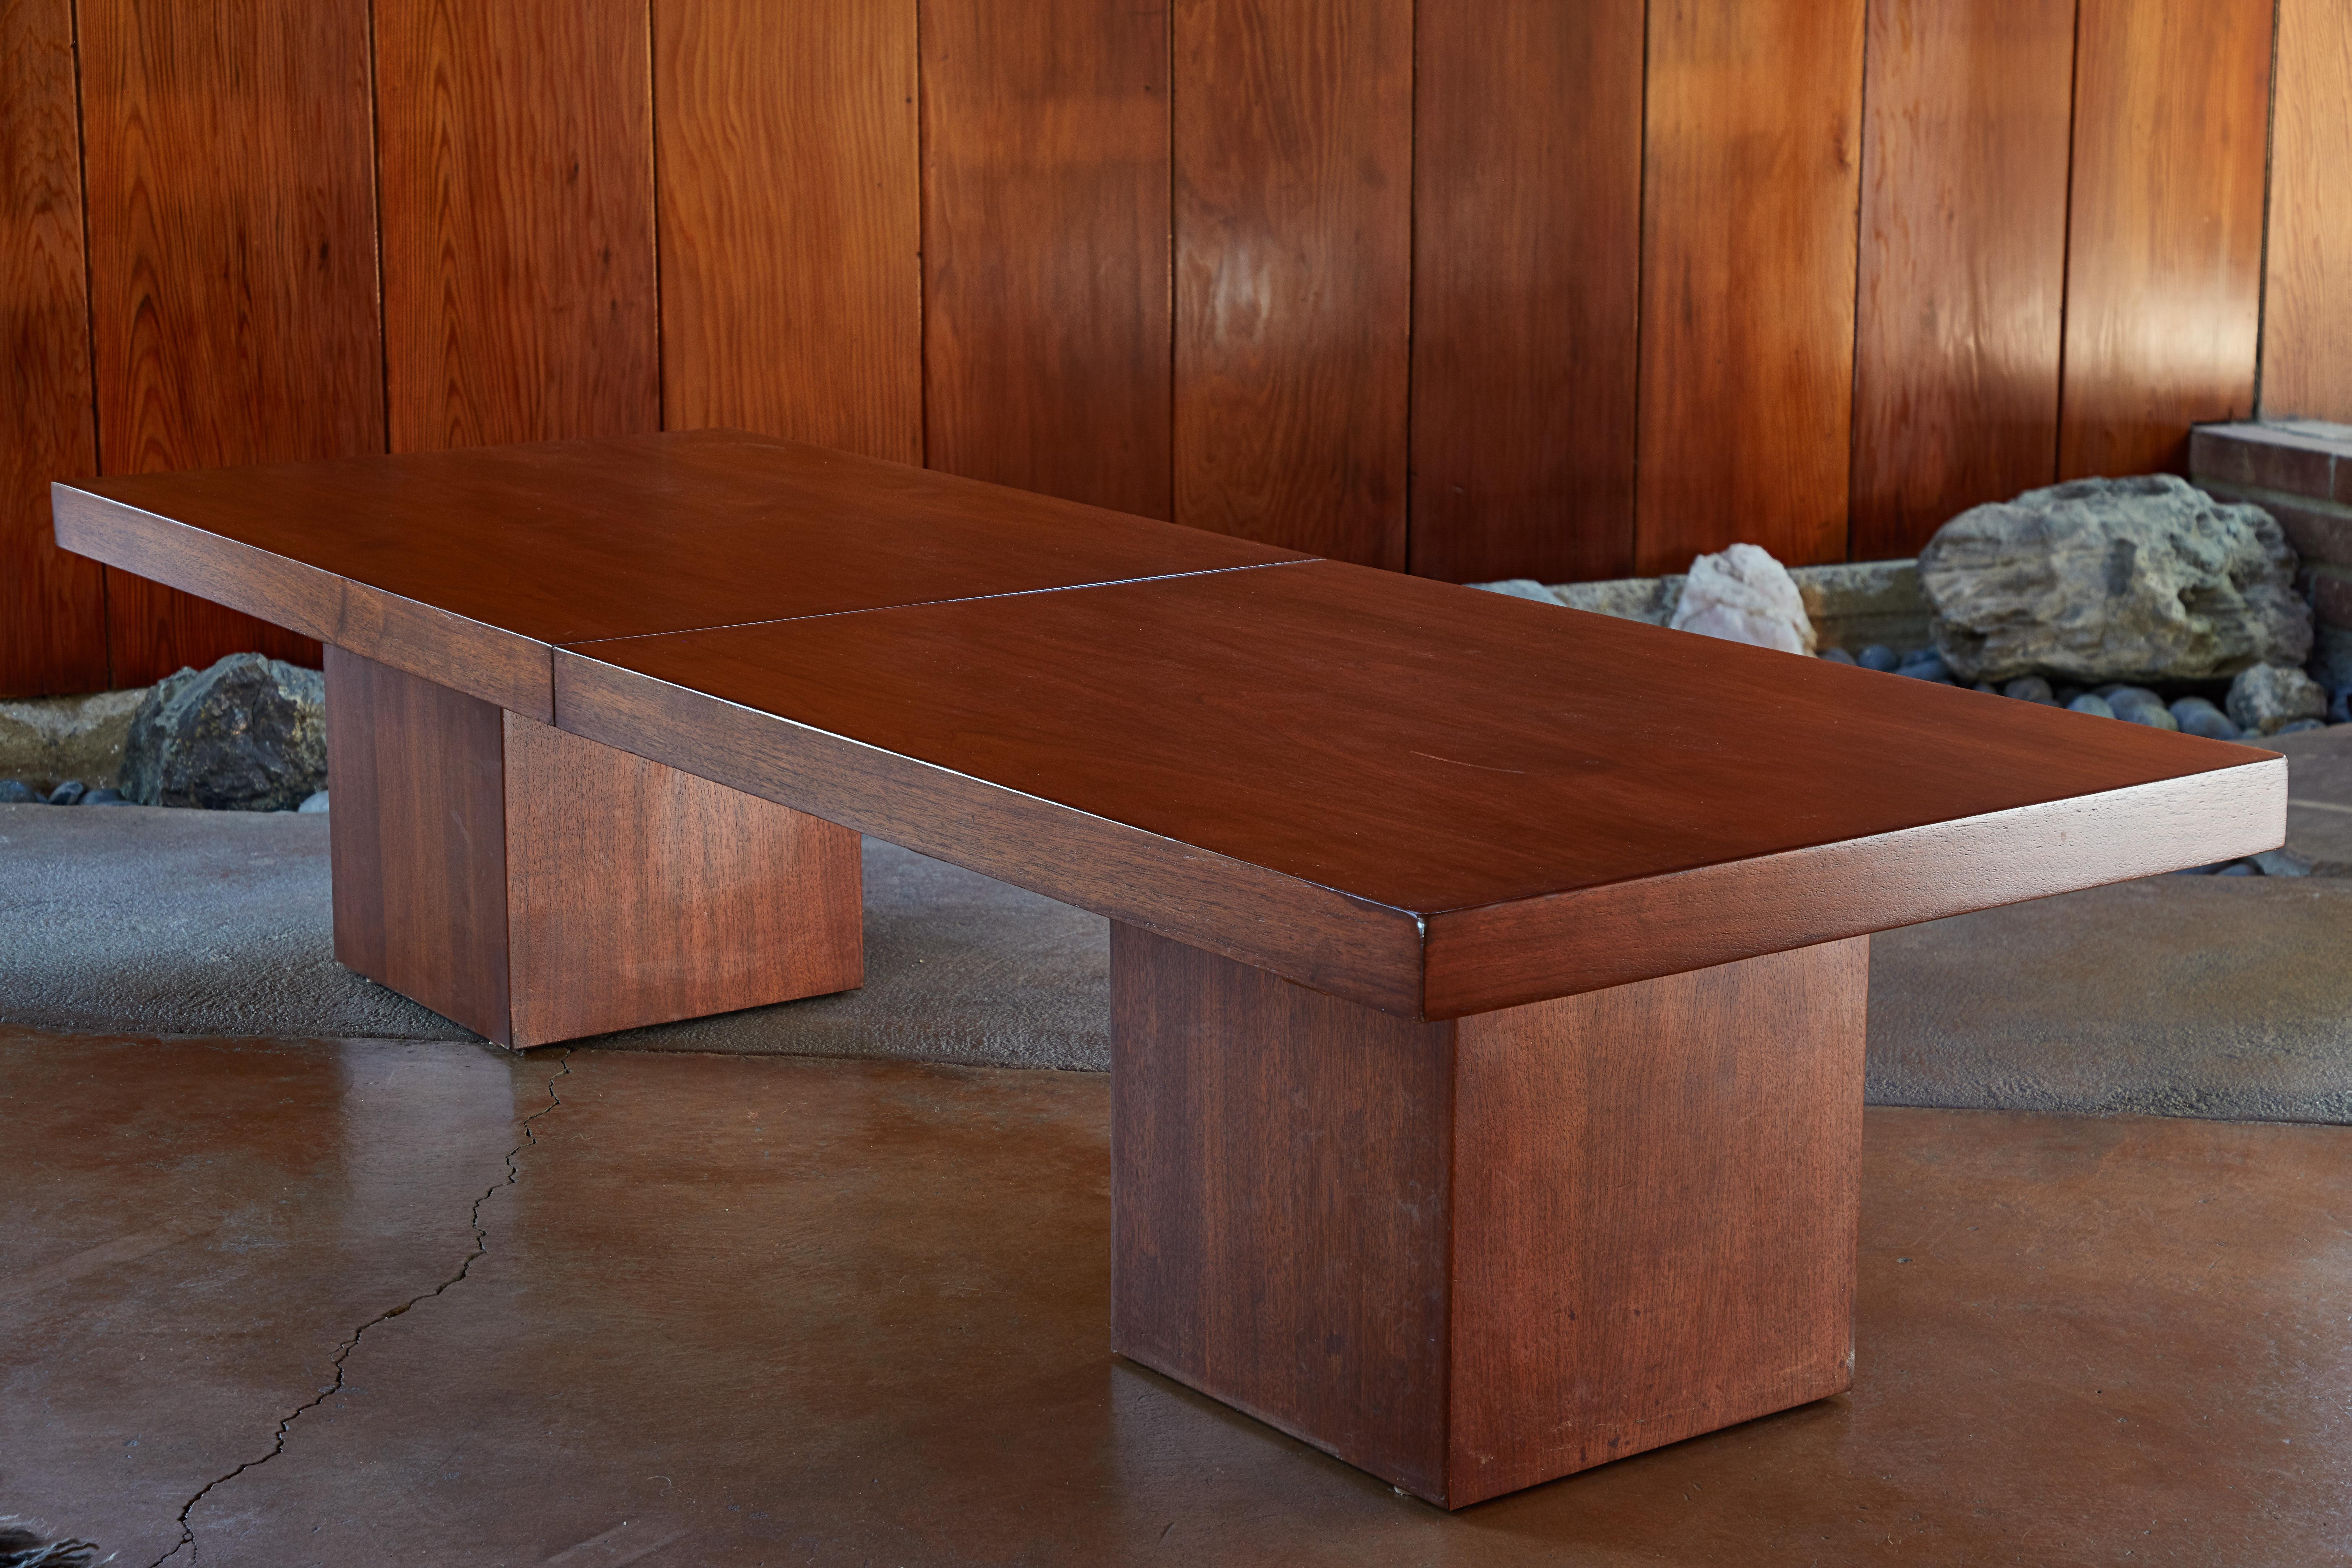 1960s John Keal expanding walnut coffee table by Brown Saltman. Executed in American walnut and black formica. The rectilinear top sits atop a pair of square bases, expanding approximately 80